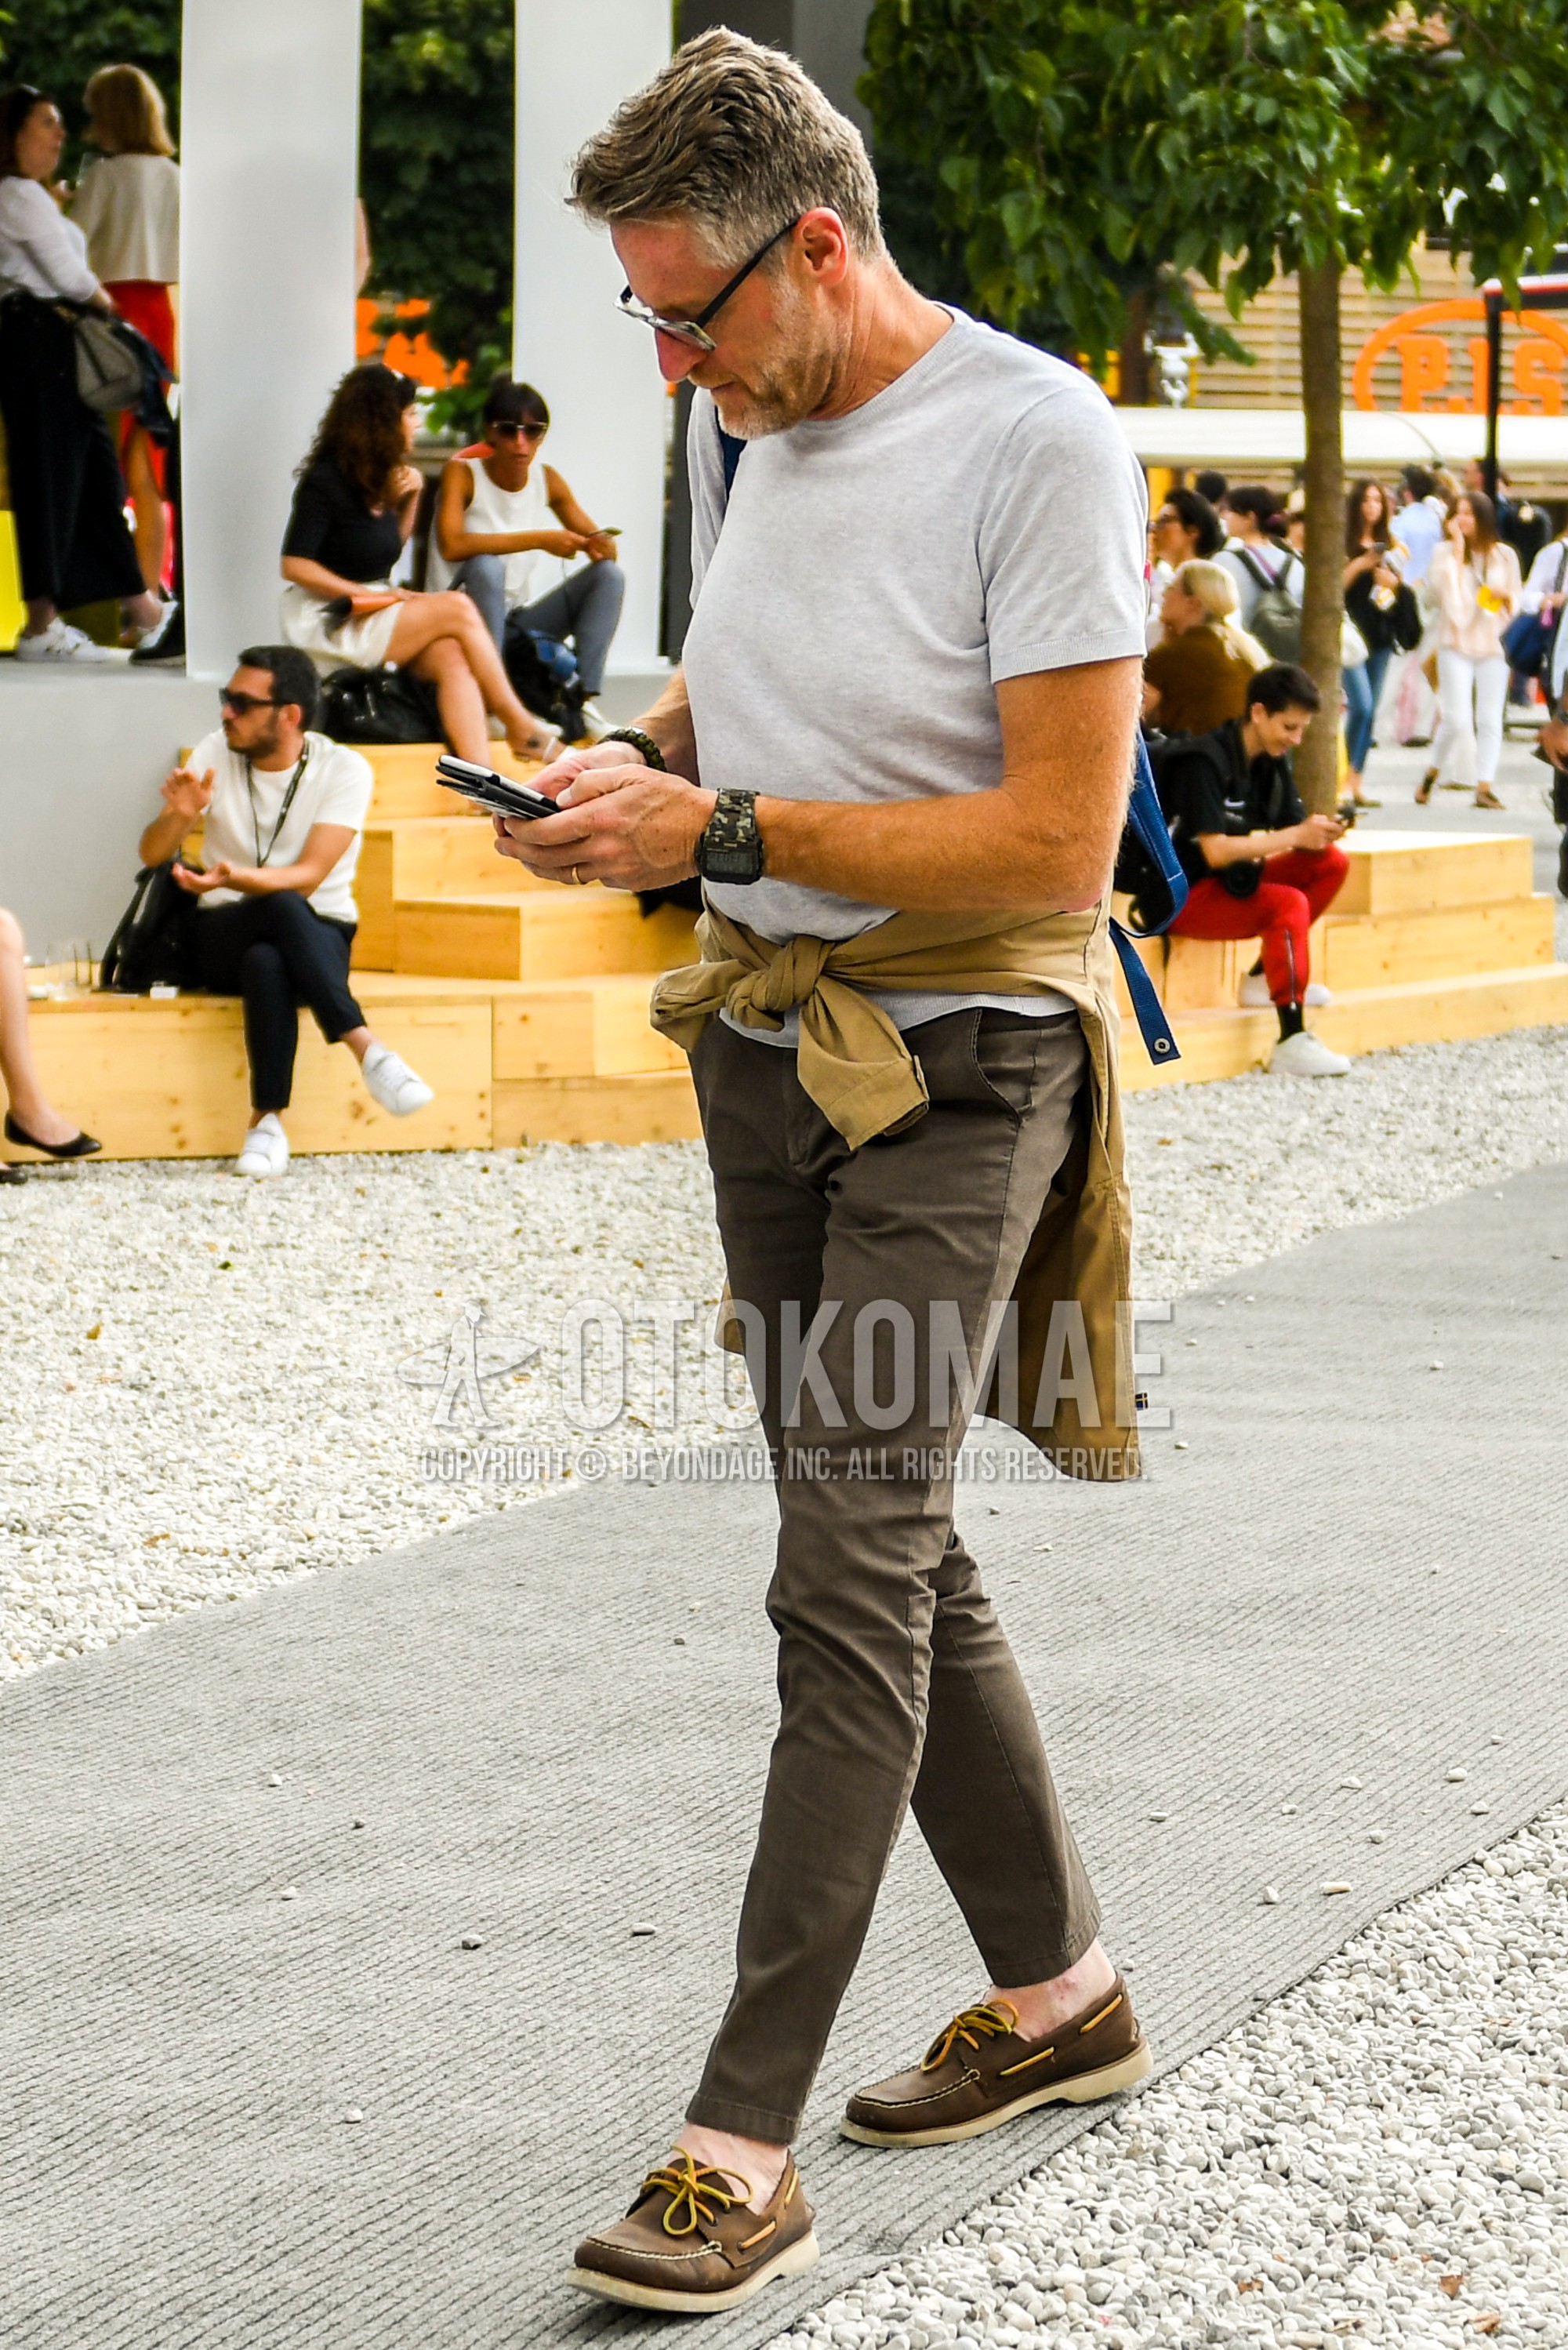 Men's summer outfit with plain glasses, gray plain t-shirt, brown plain chinos, brown moccasins/deck shoes leather shoes.